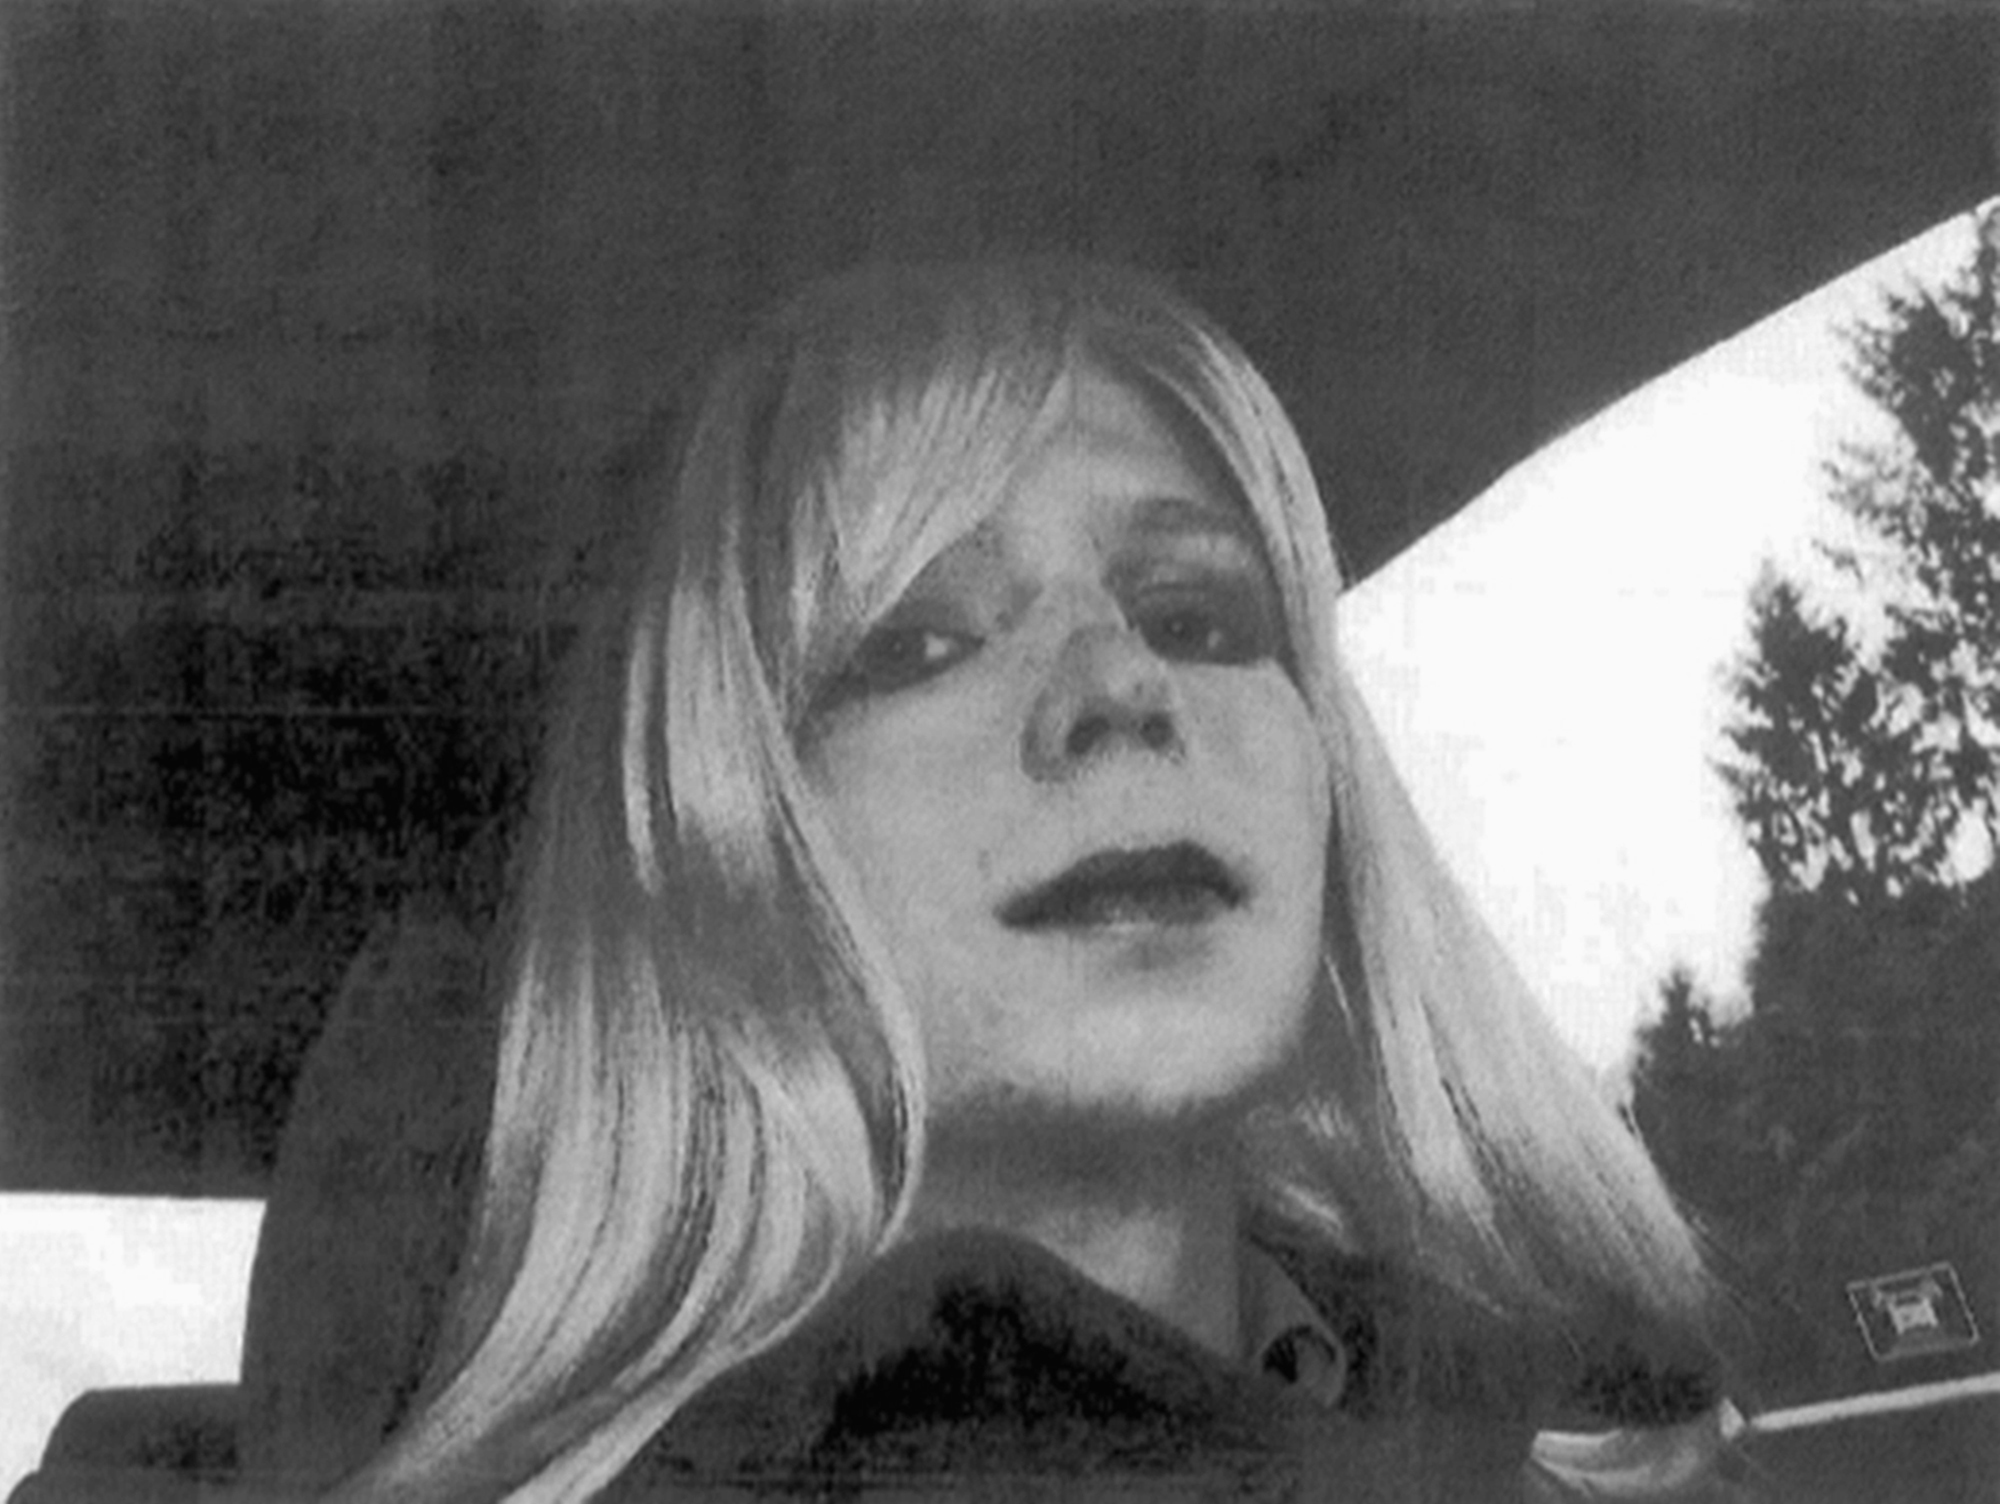 FILE - In this undated file photo provided by the U.S. Army, Pfc. Chelsea Manning poses for a photo wearing a wig and lipstick. Manning, the transgender soldier convicted in 2013 of illegally disclosing classified government information, will remain on active duty in a special status after her scheduled release from prison Wednesday, May 17, 2017. (U.S.